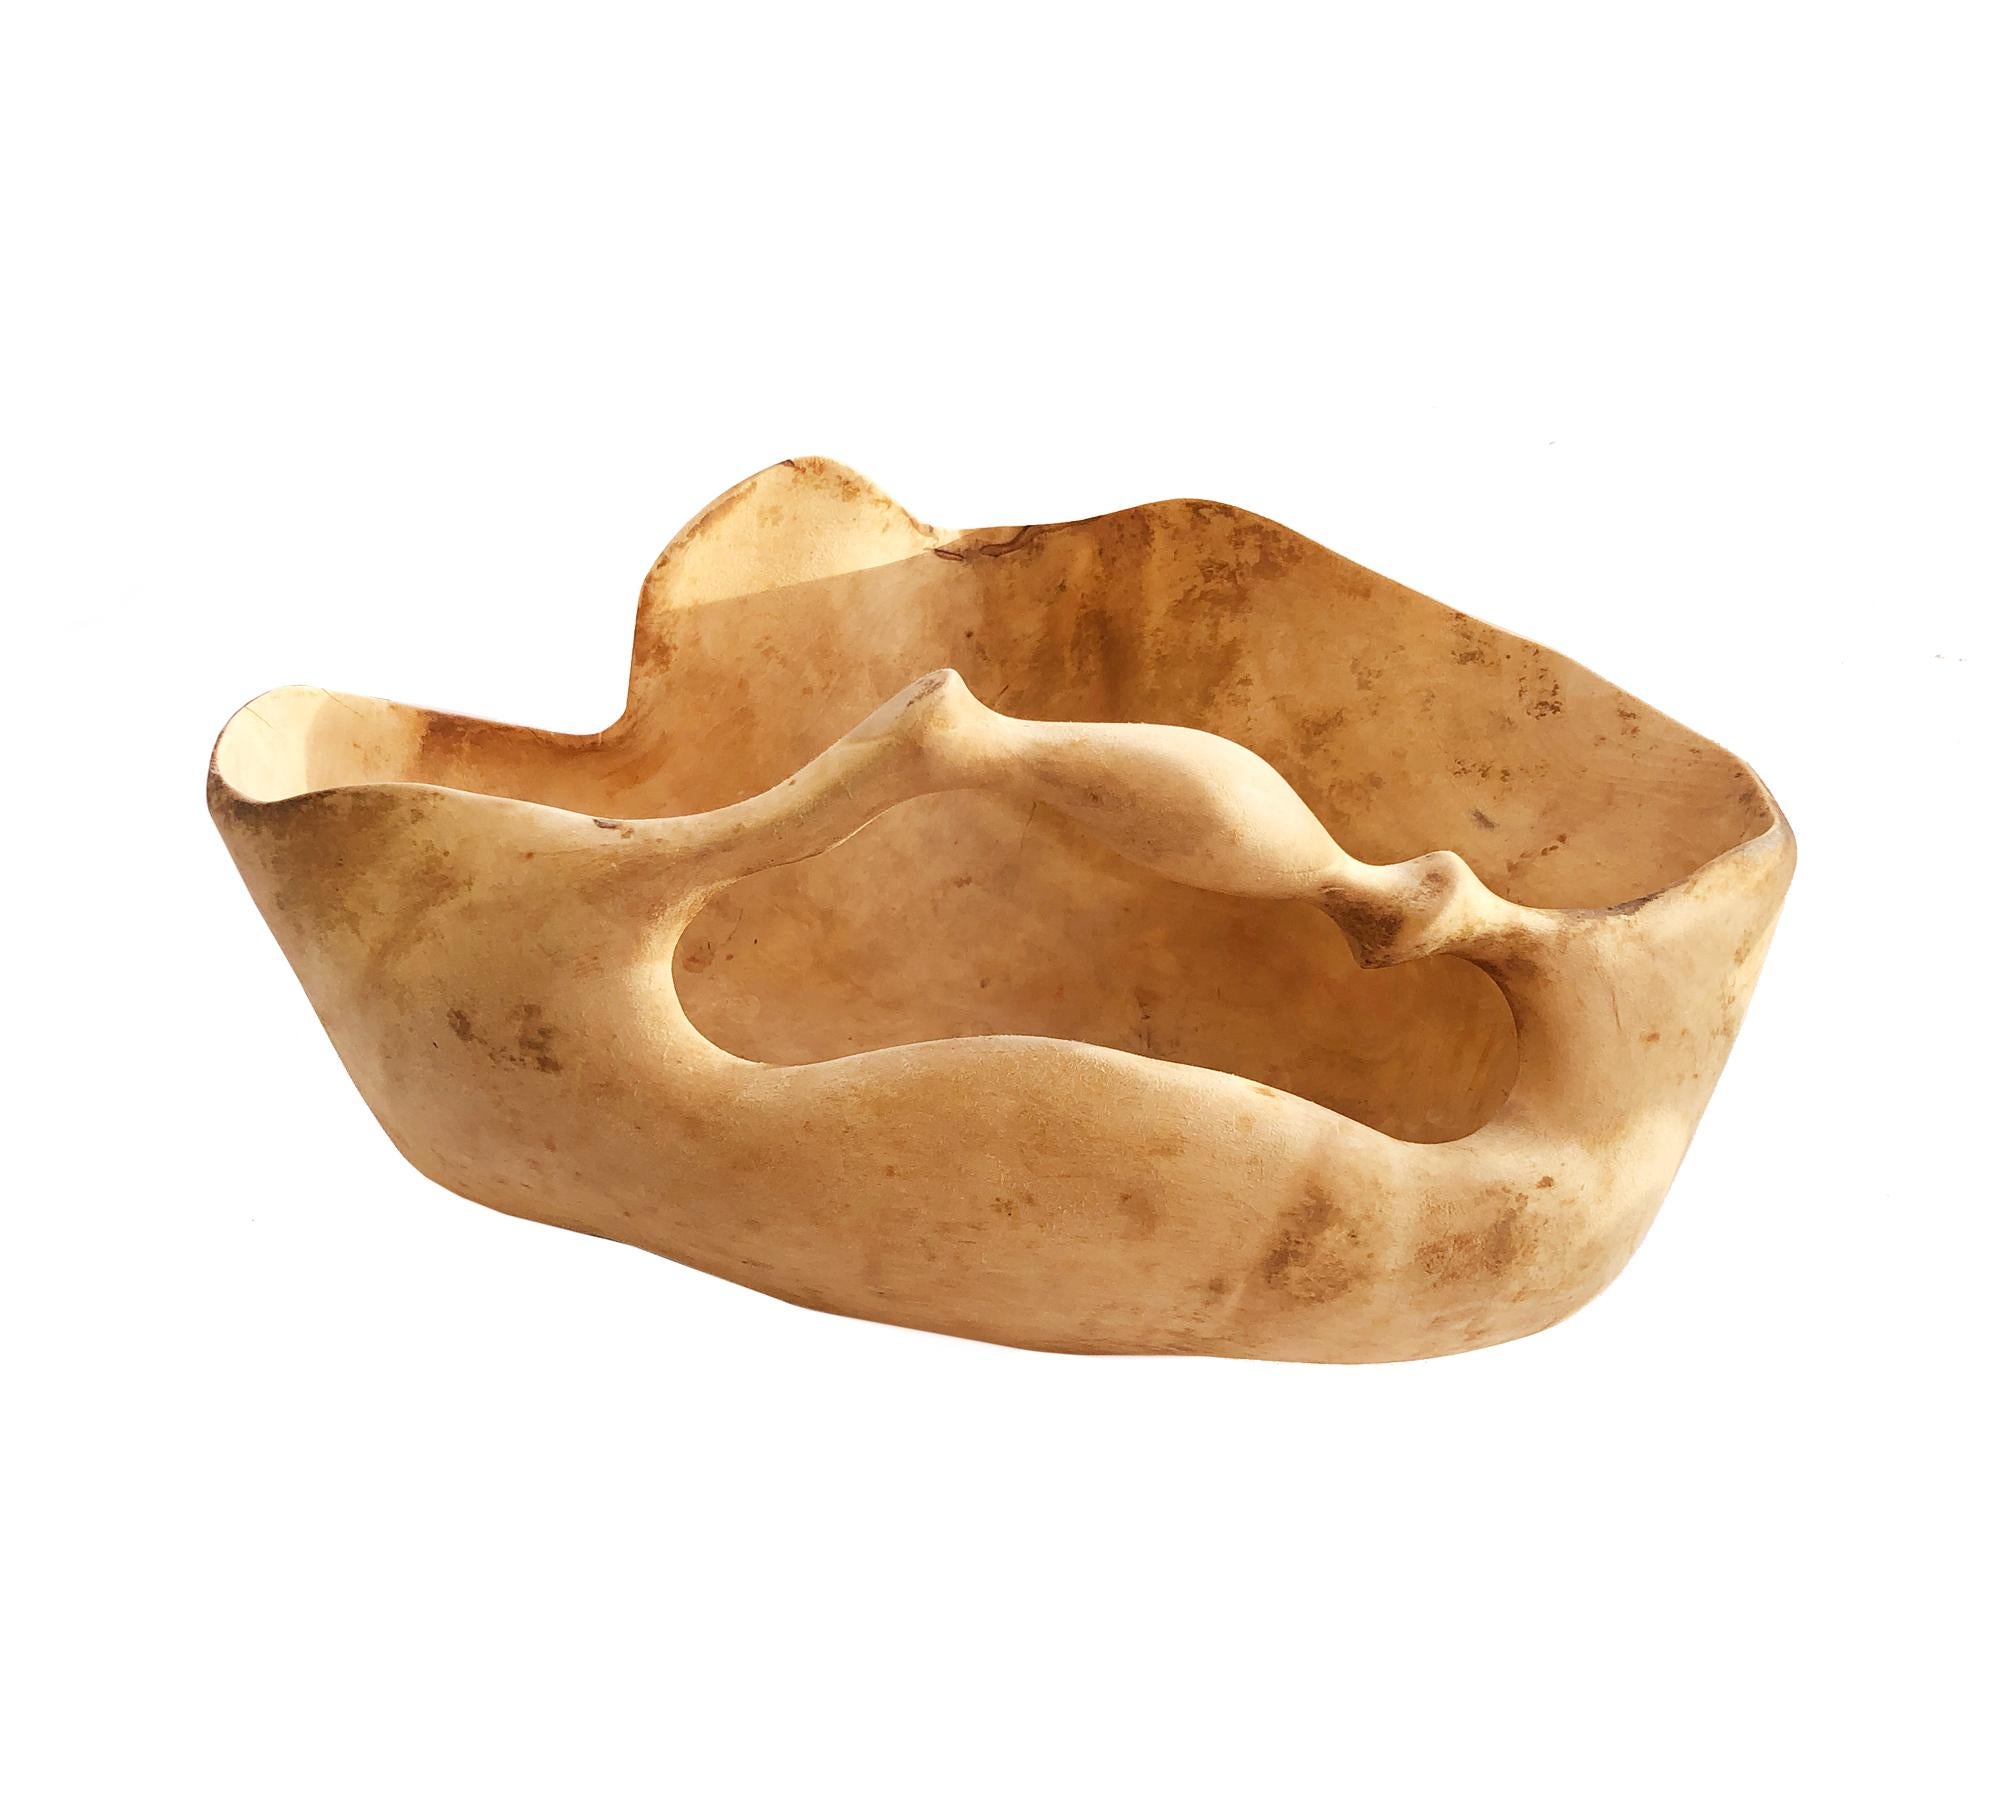 Hand-Crafted Wooden Hand Carved Bowl Made Out of Birch in Sweden 1978, Signed Holger Jonsson For Sale